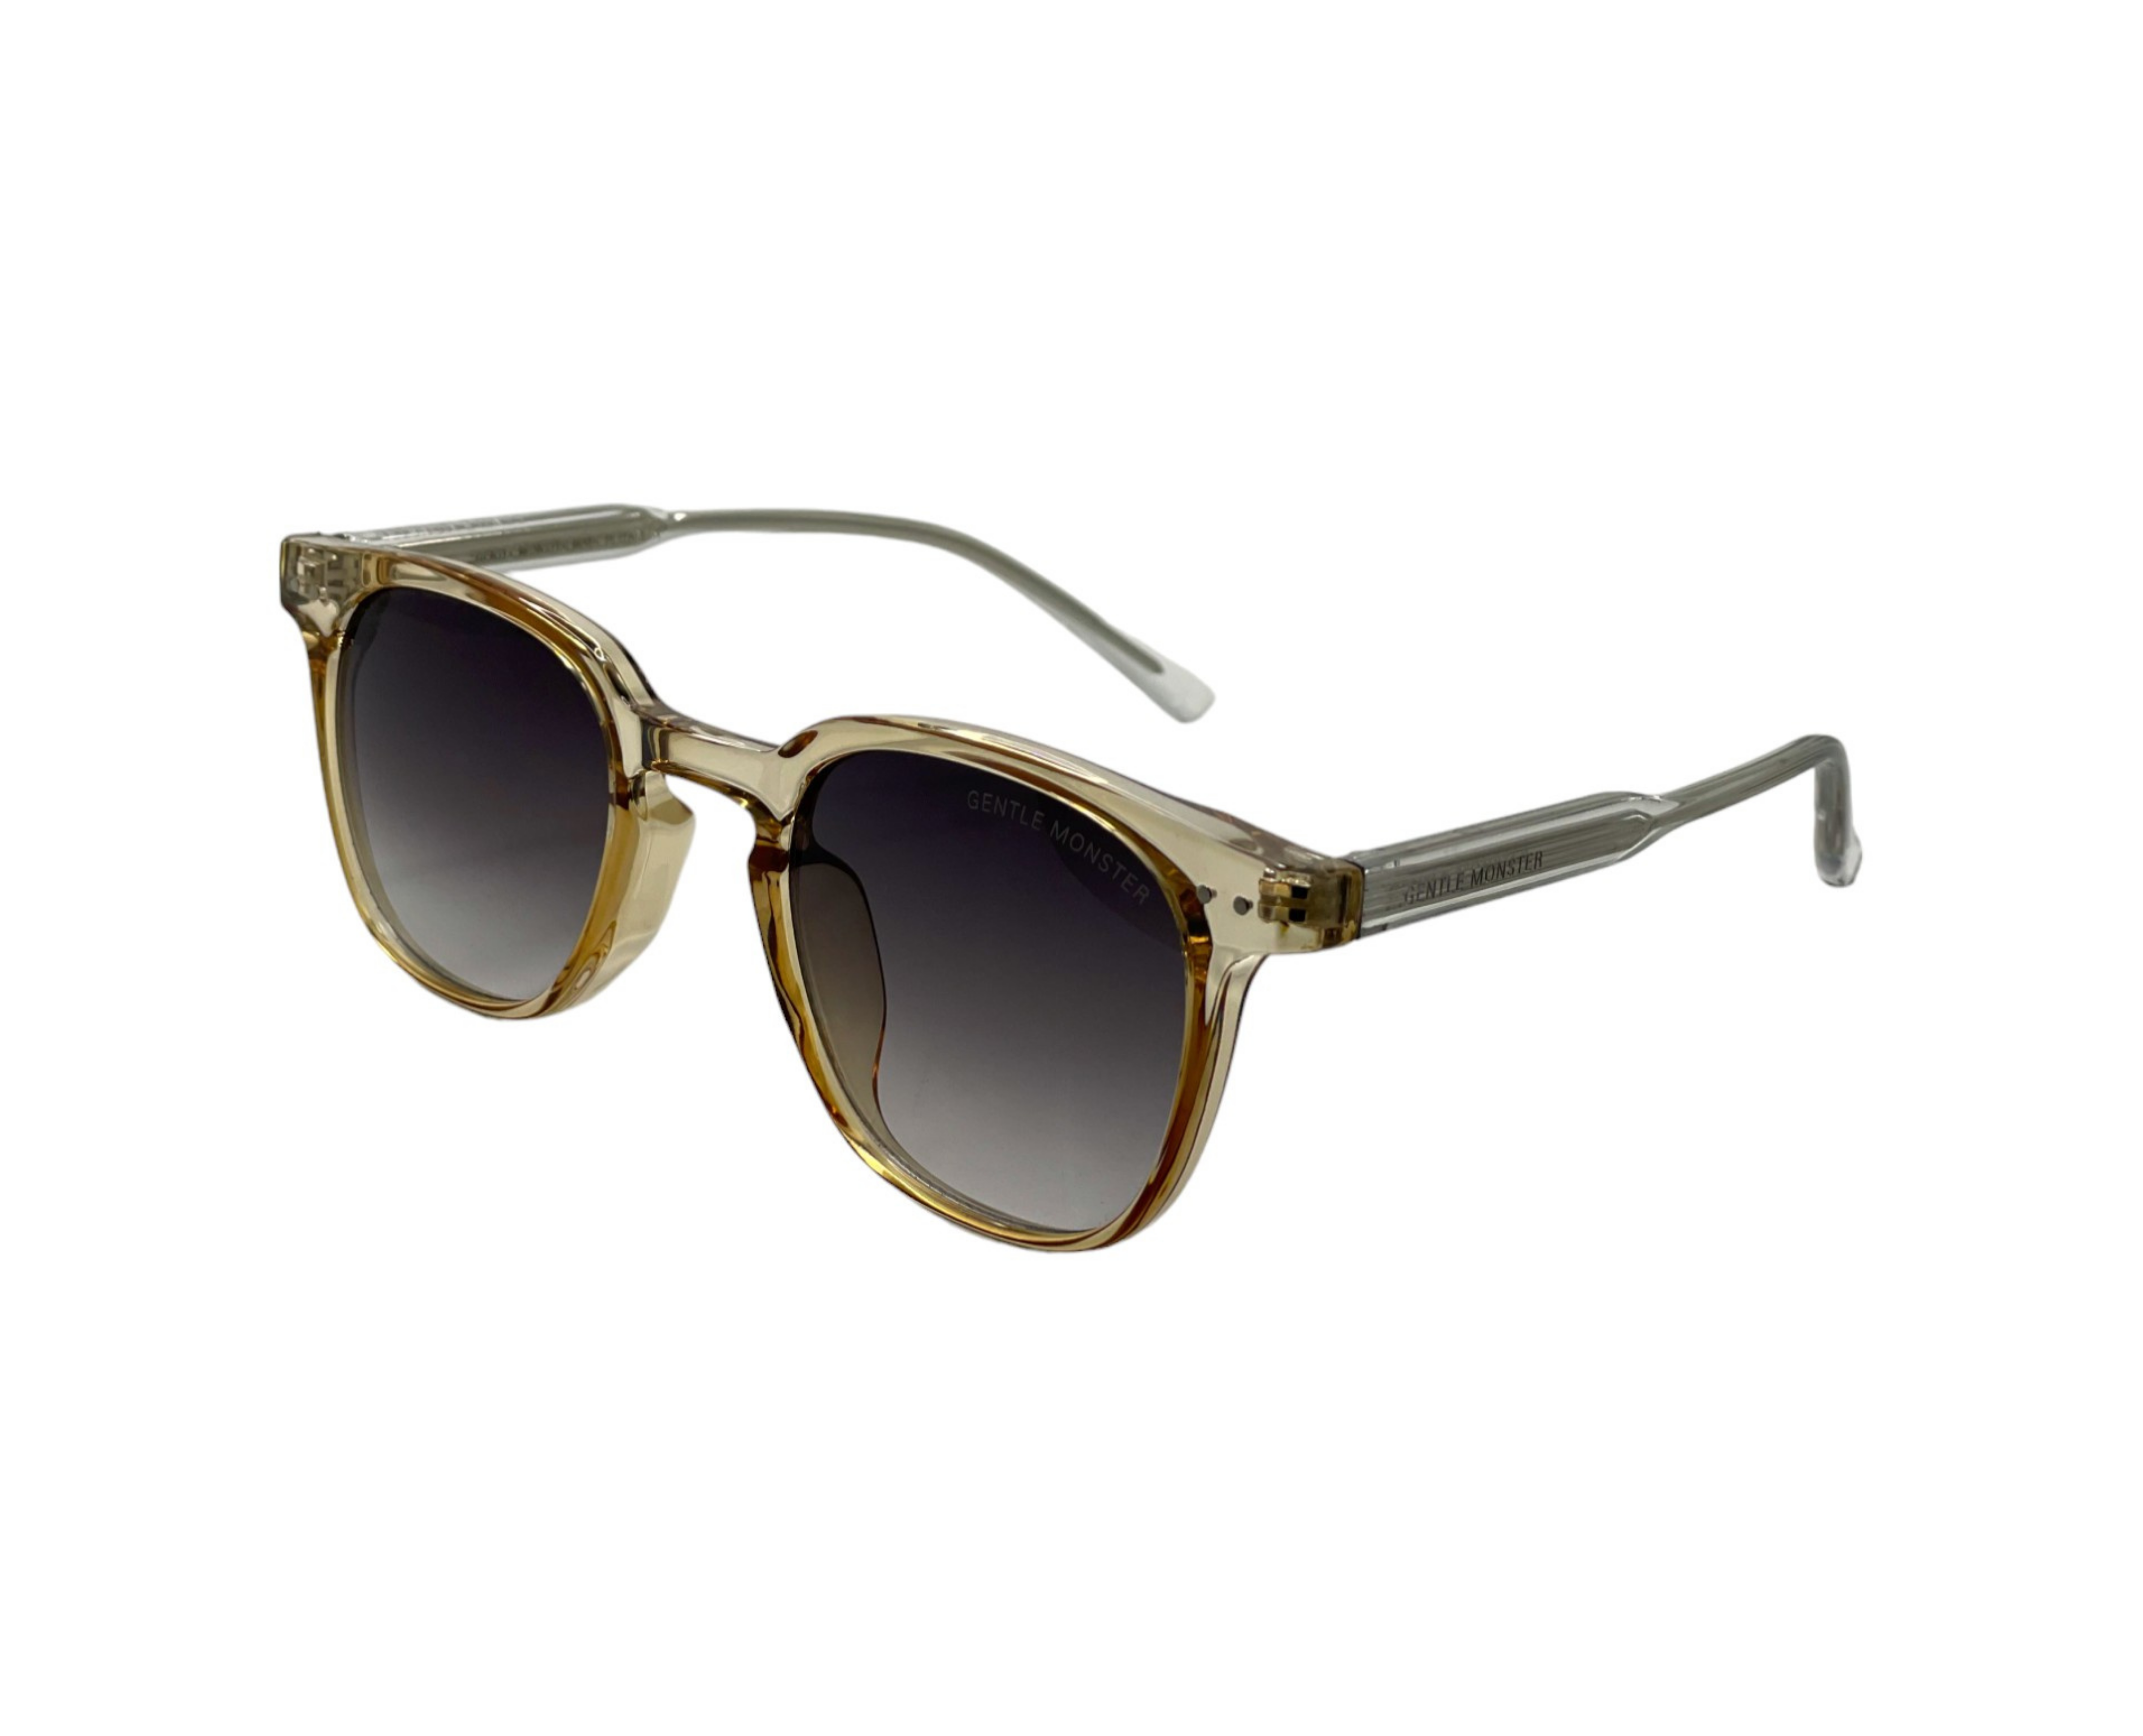 NS Deluxe - 6265 - Light Brown - Sunglasses